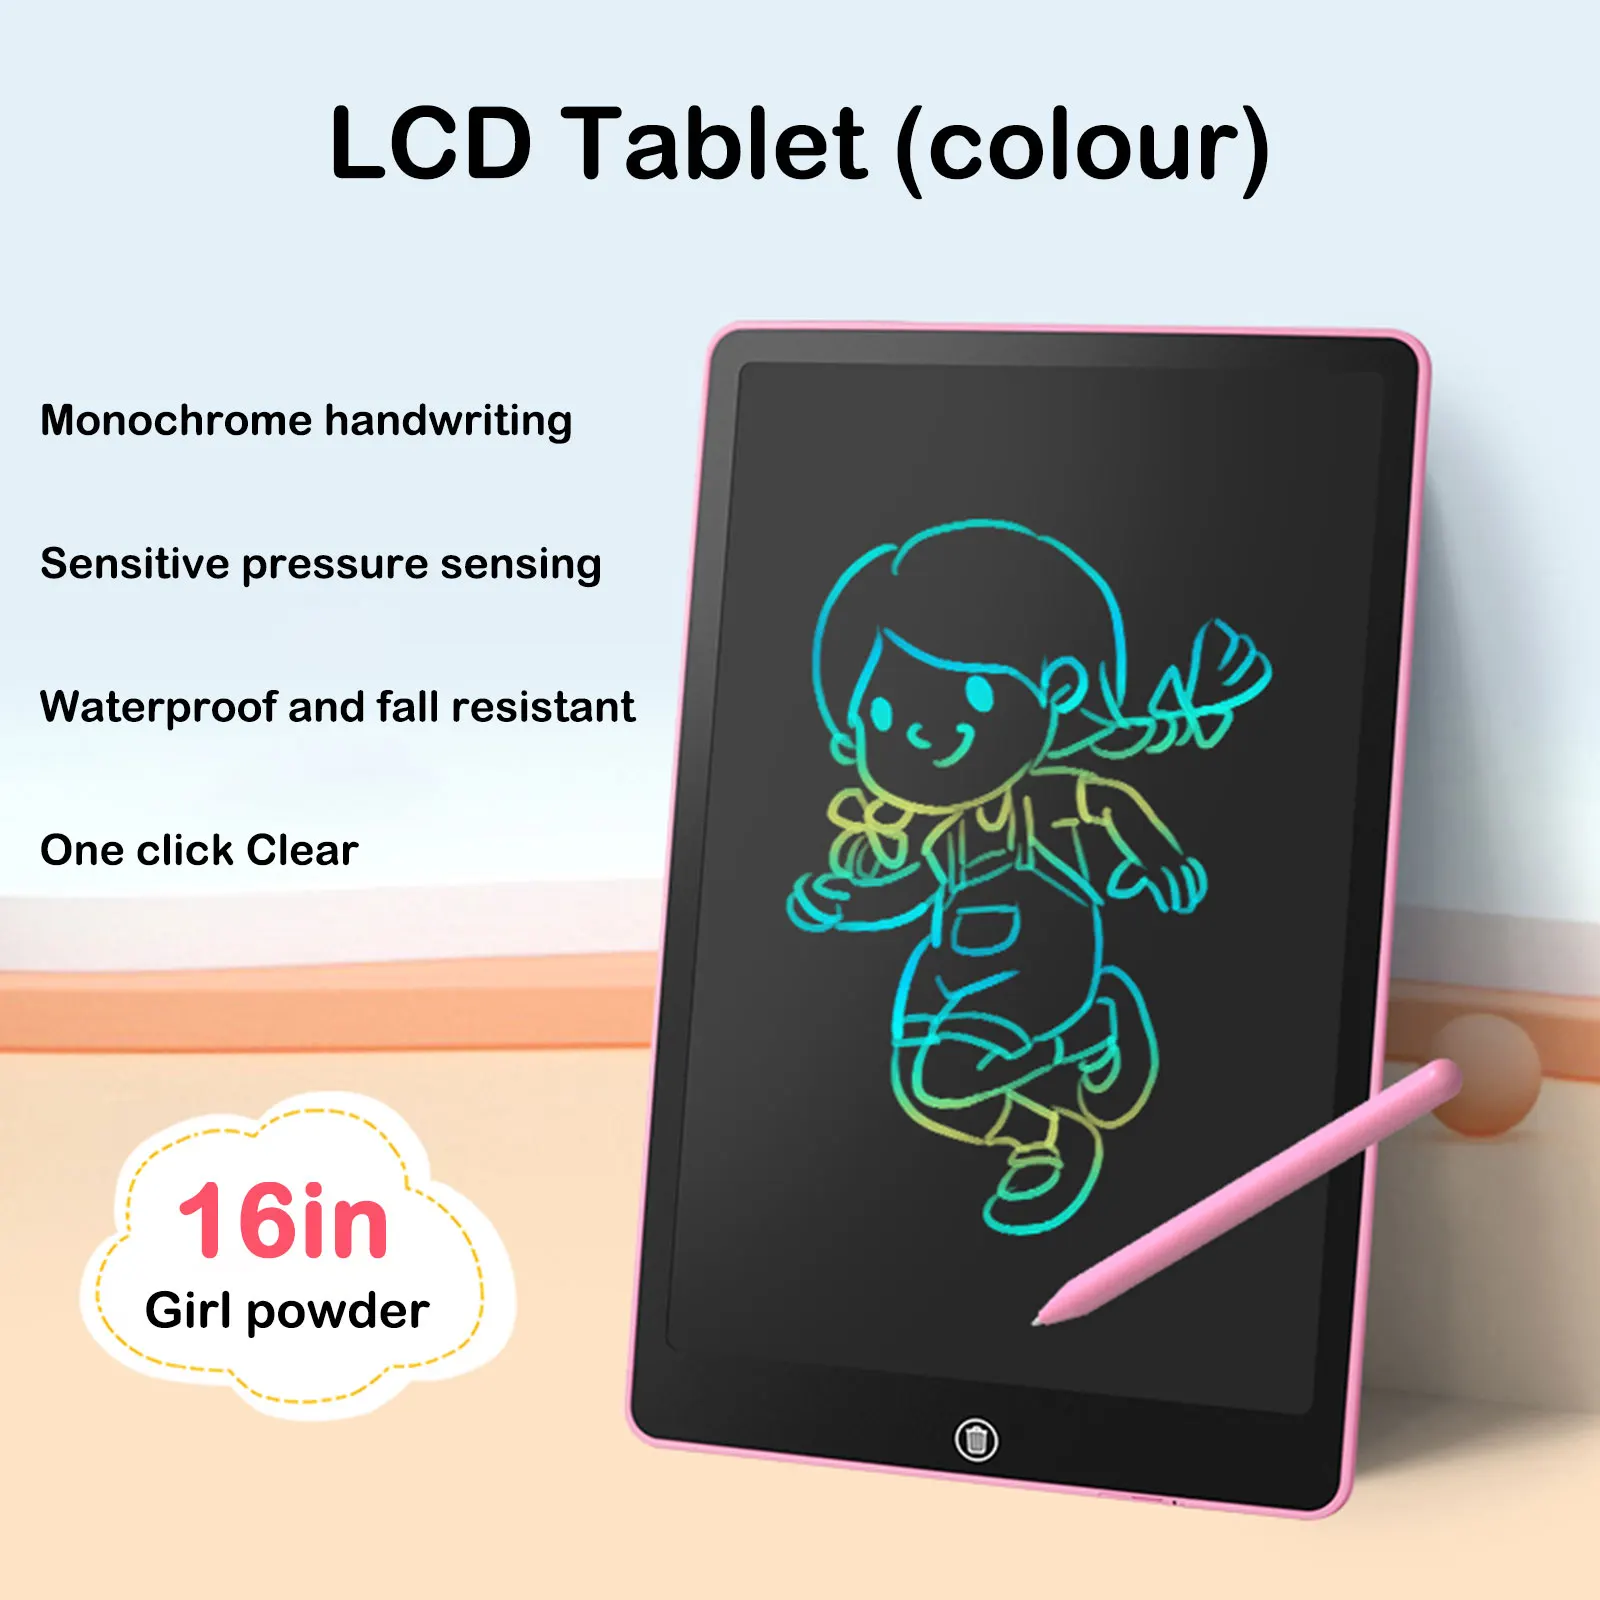 https://ae01.alicdn.com/kf/Sc750138c54004fce9c30466c8713bb2eC/16inch-Children-s-Magic-Blackboard-LCD-Drawing-Tablet-Toys-for-Girls-Digital-Notebook-Big-Size-Graphics.jpg